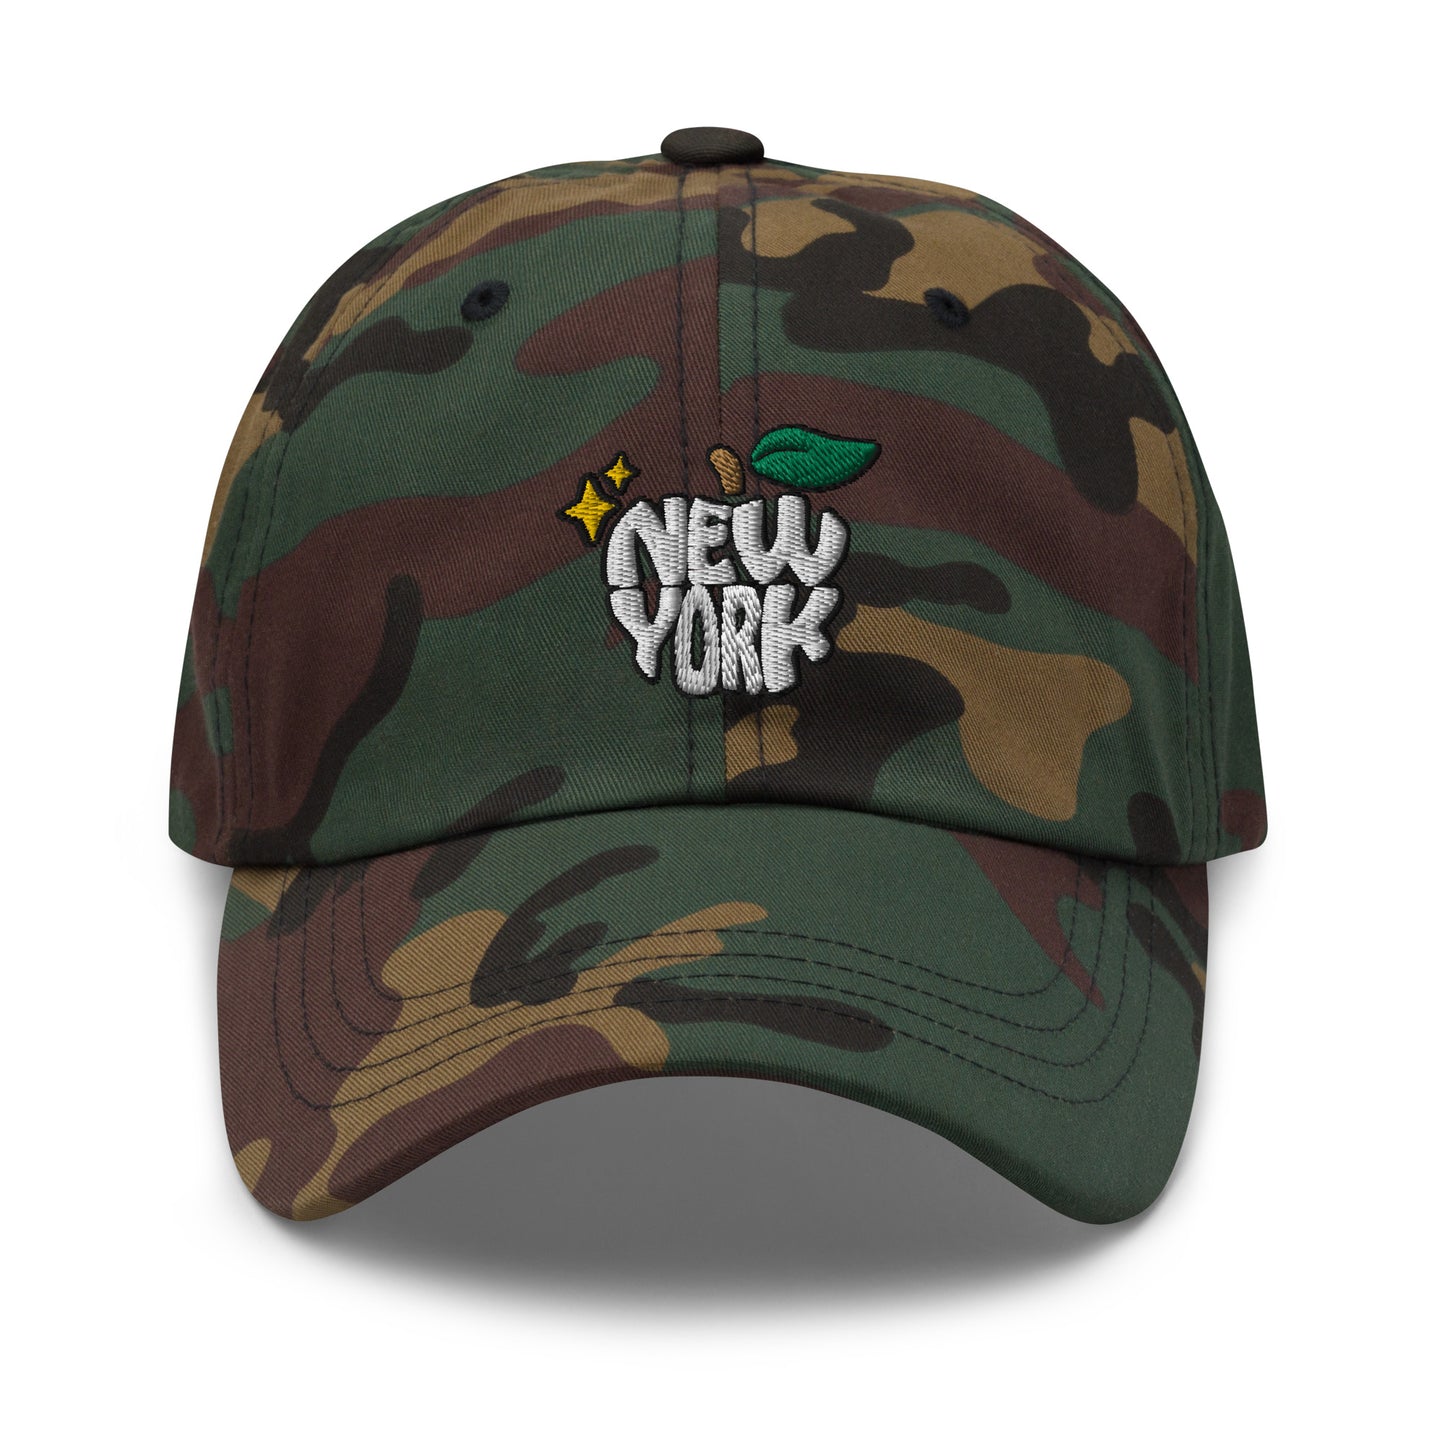 New York Apple Logo Embroidered Dad hat